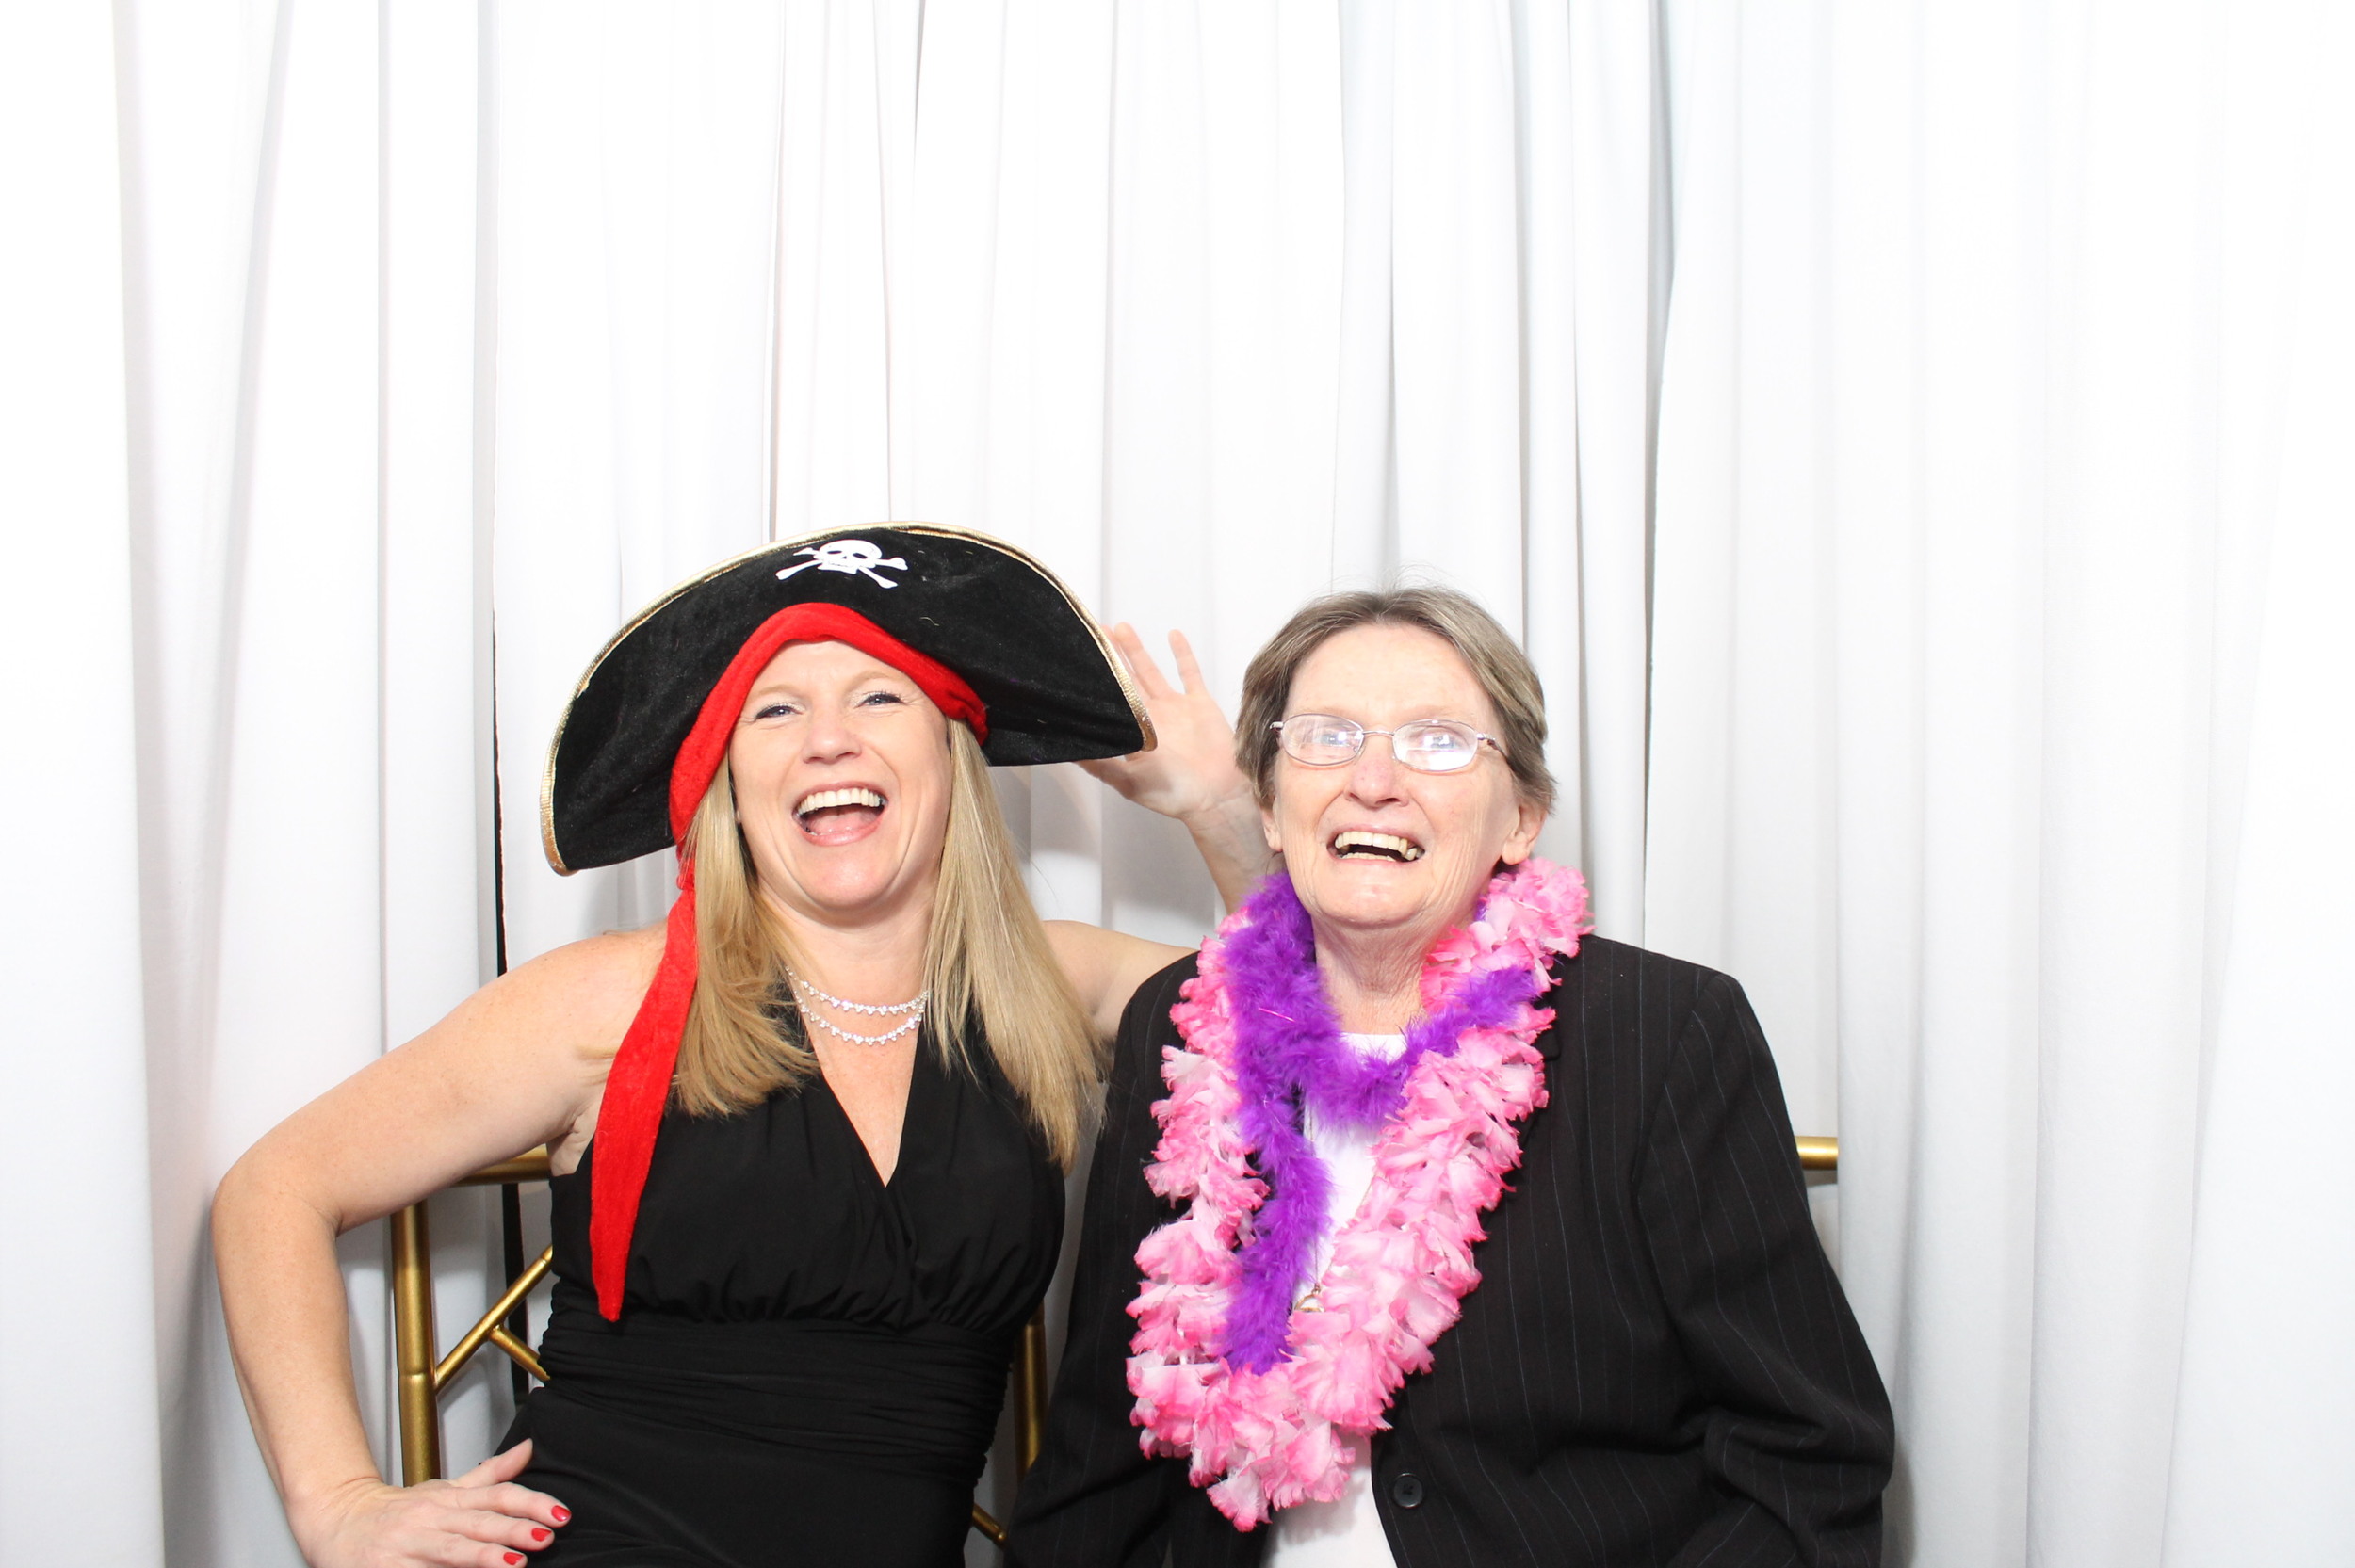 Snapshot Photobooths at Clarks Landing, Point Pleasant in New Jersey